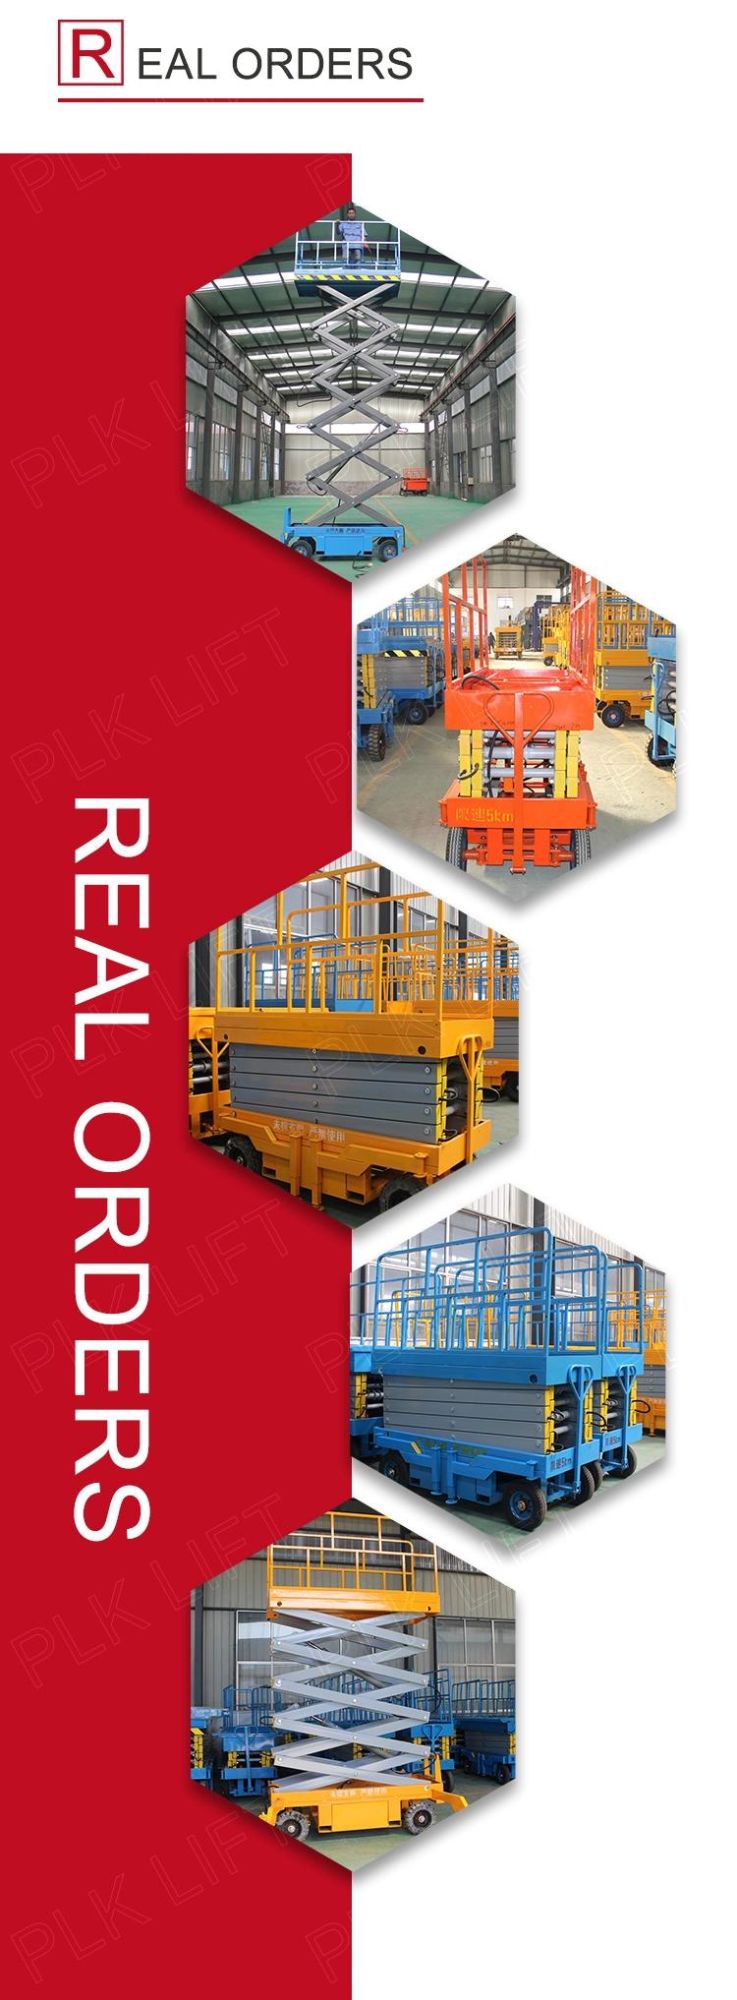 China Hydraulic Mobile Scissor Lift Table for Aerial Work